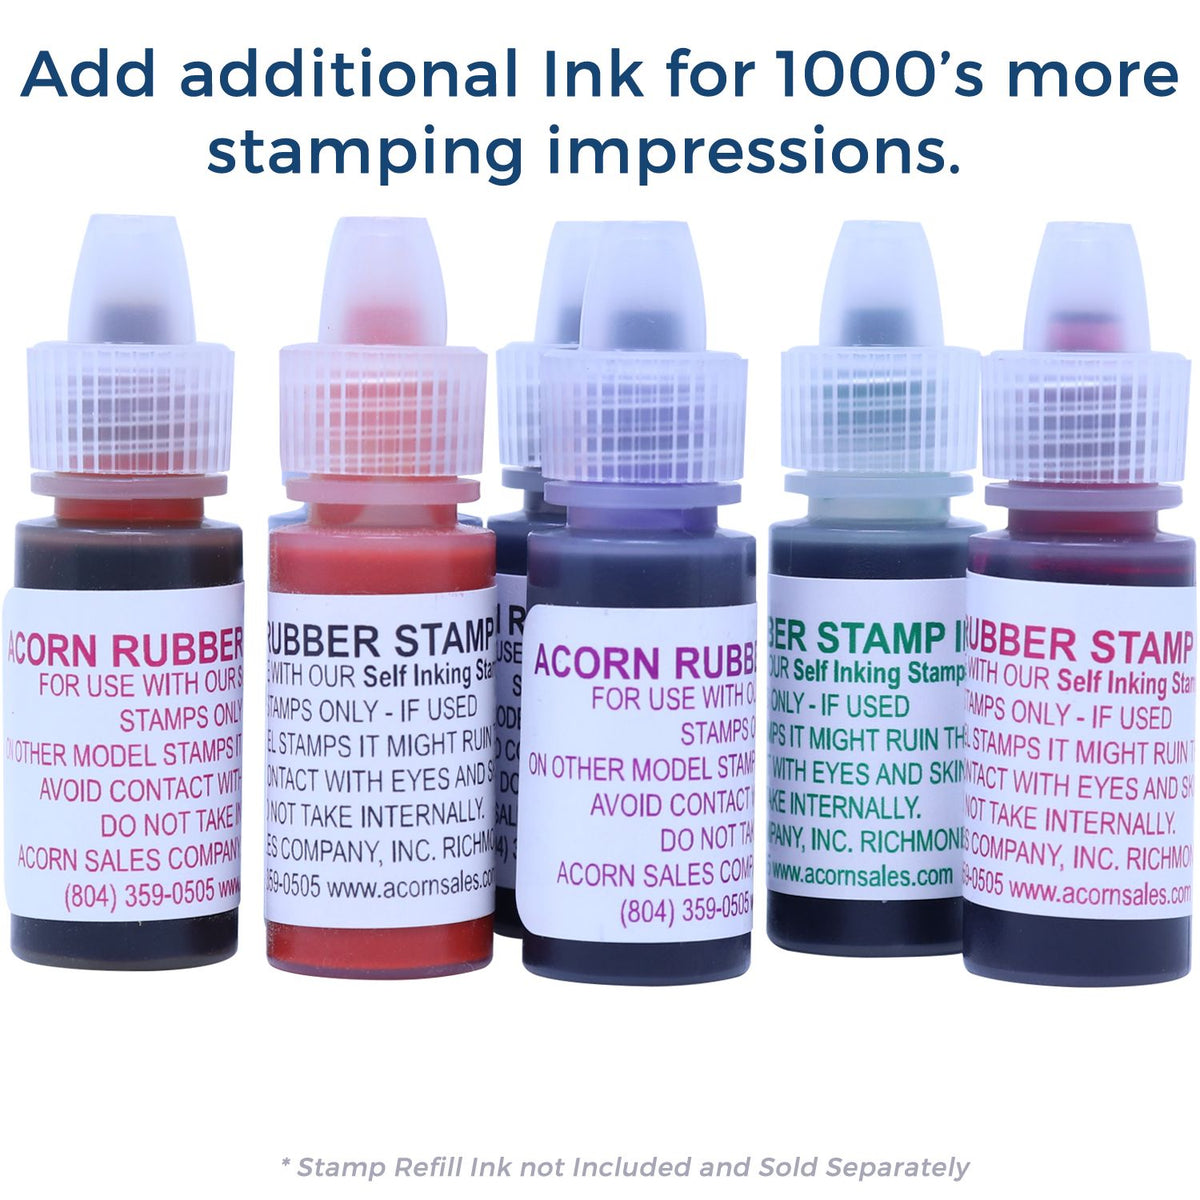 Refill Ink for Self-Inking Round Sign and Return Stamp Available